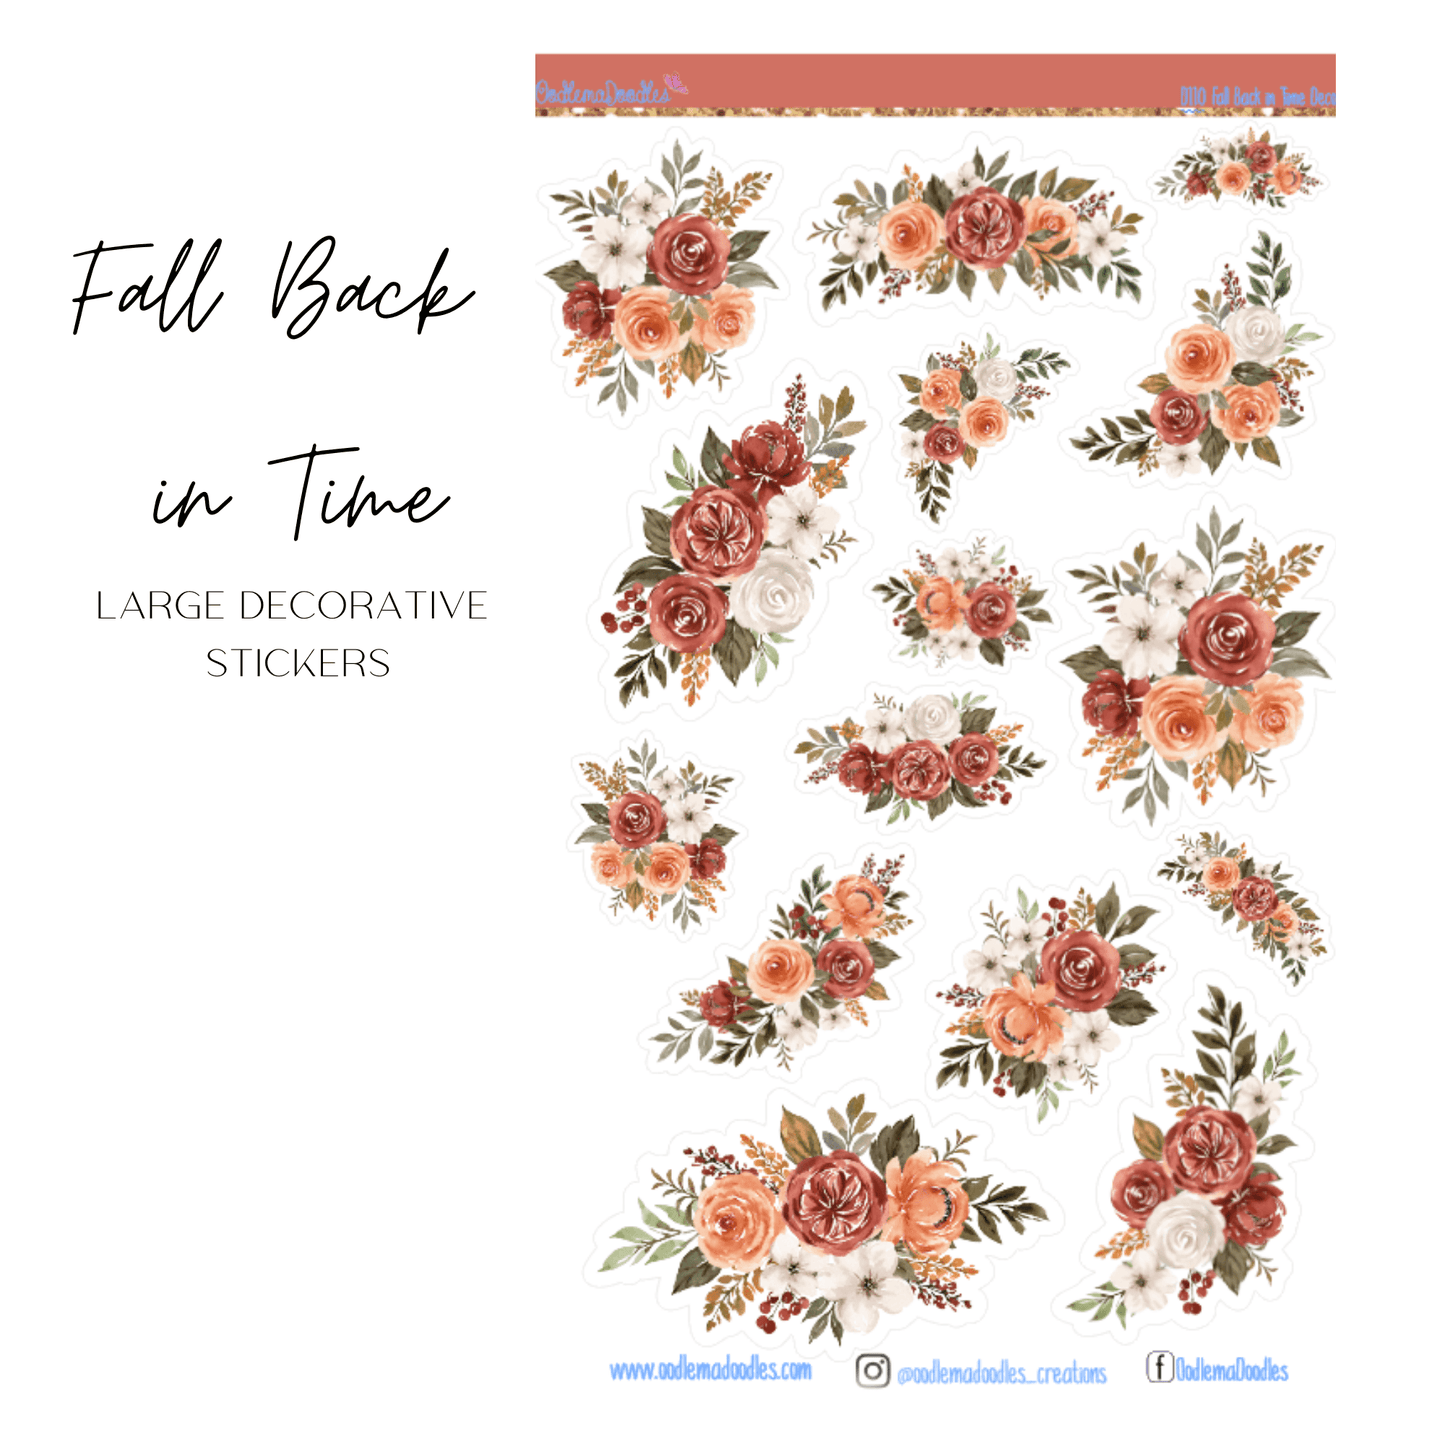 Fall Back in Time Large Decorative Stickers